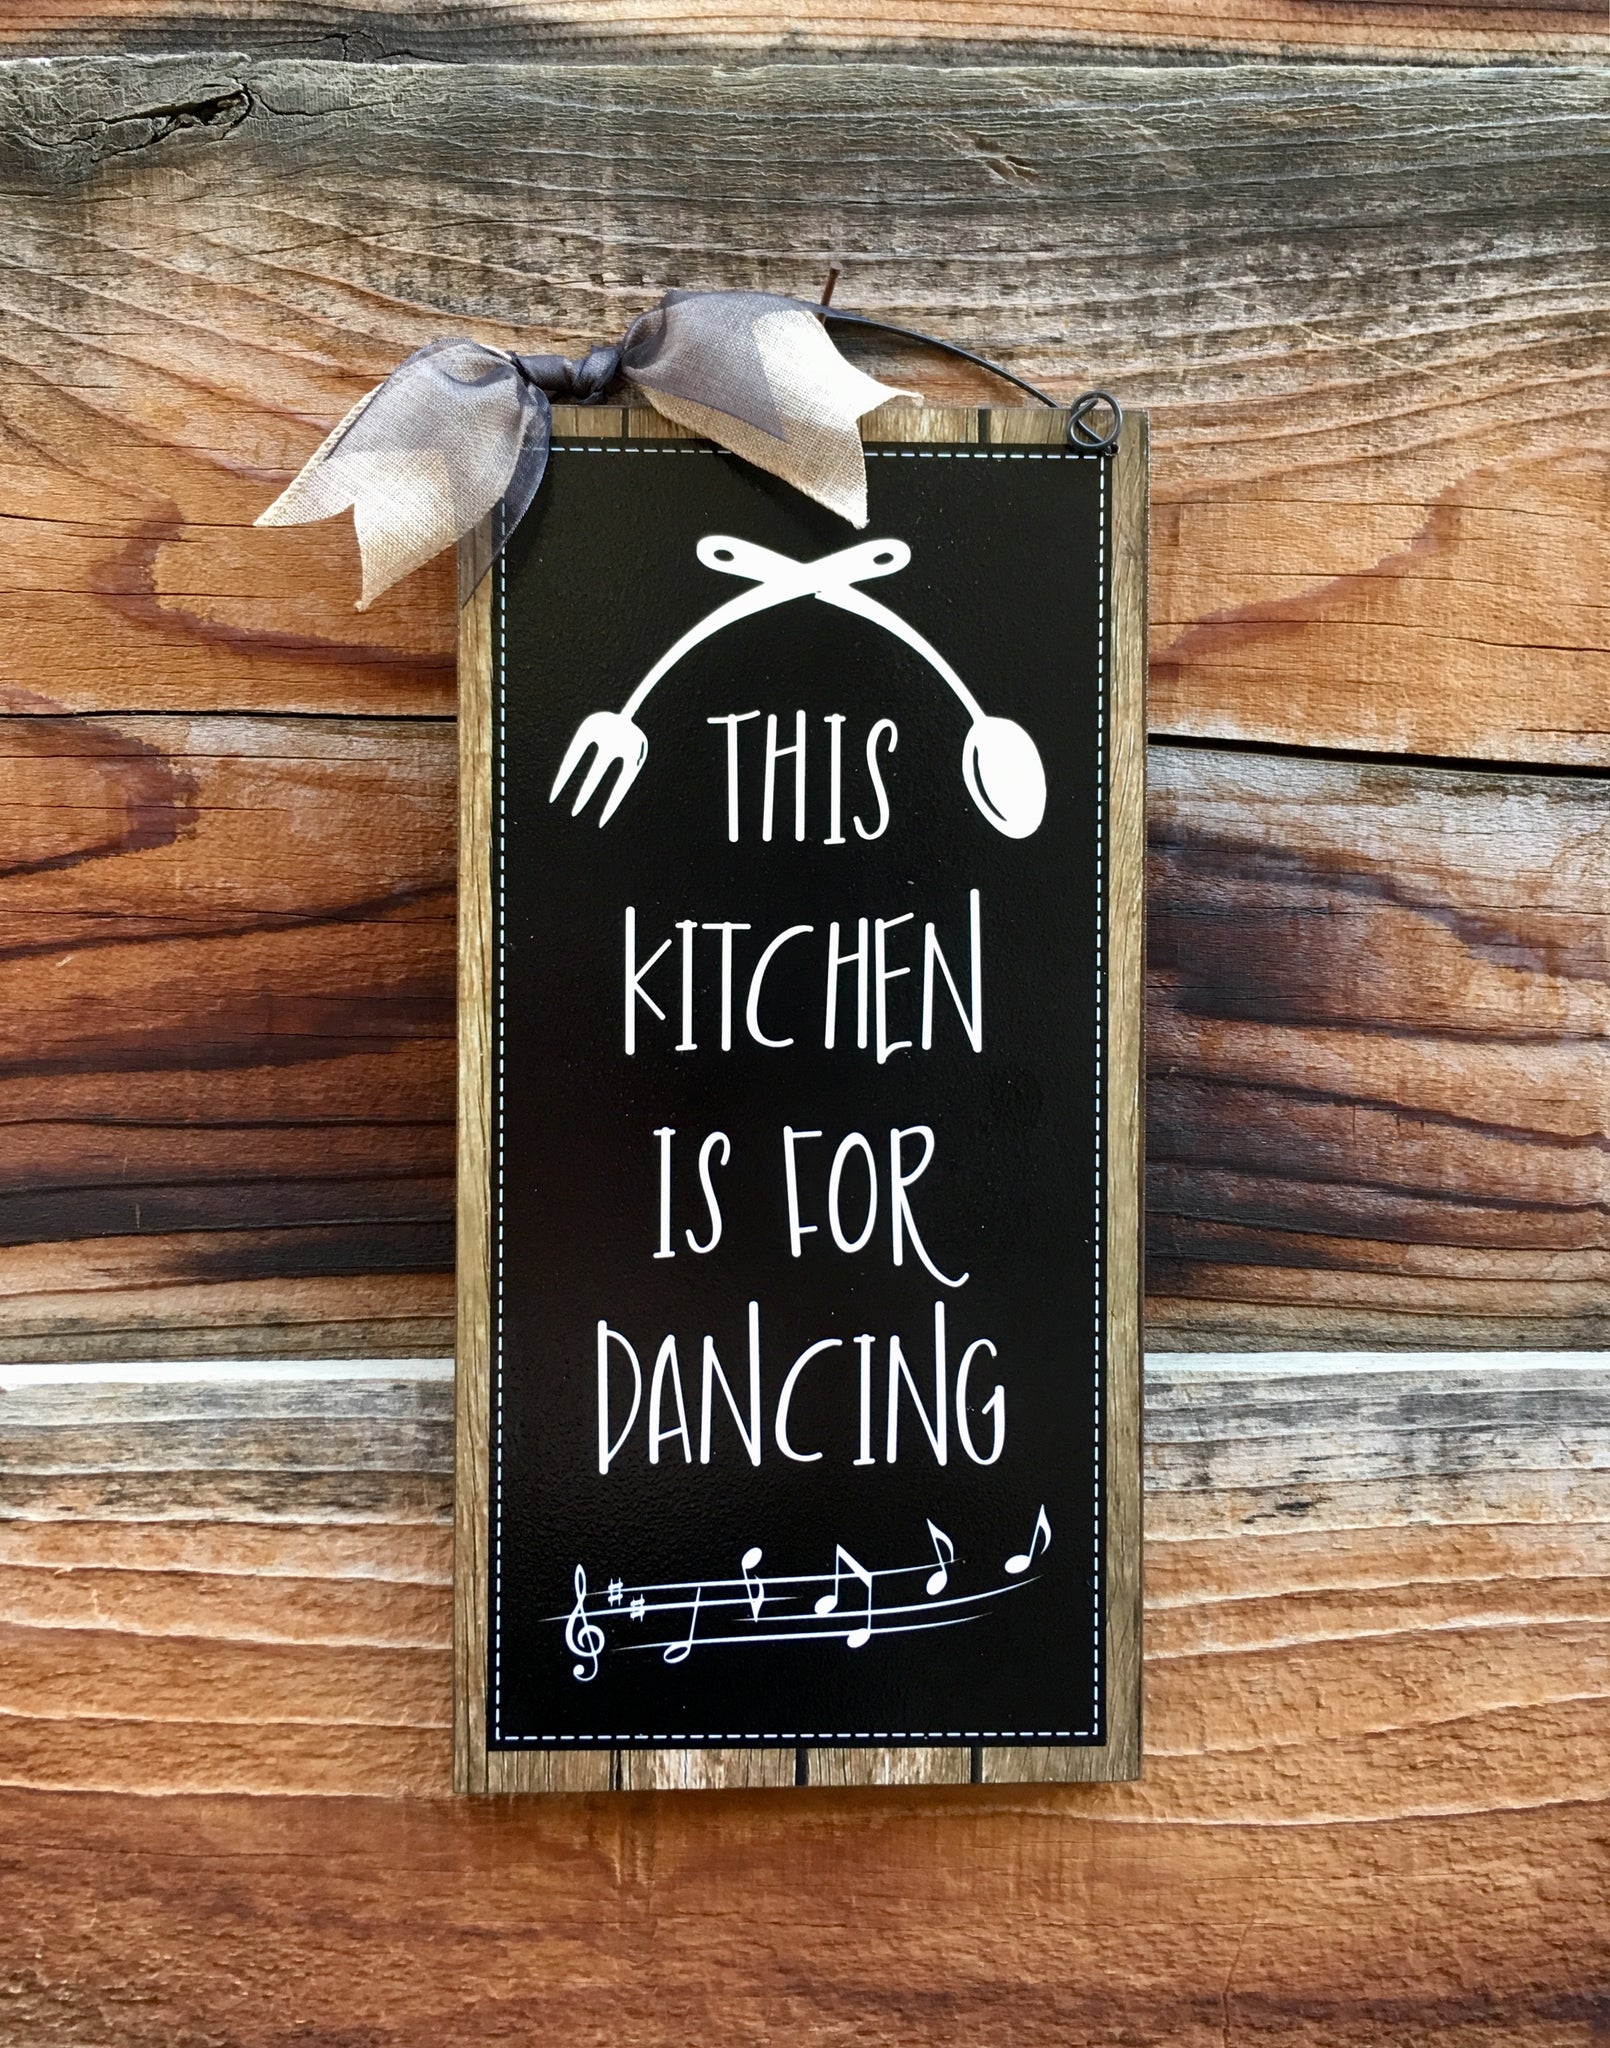 This Kitchen is for Dancing sign.